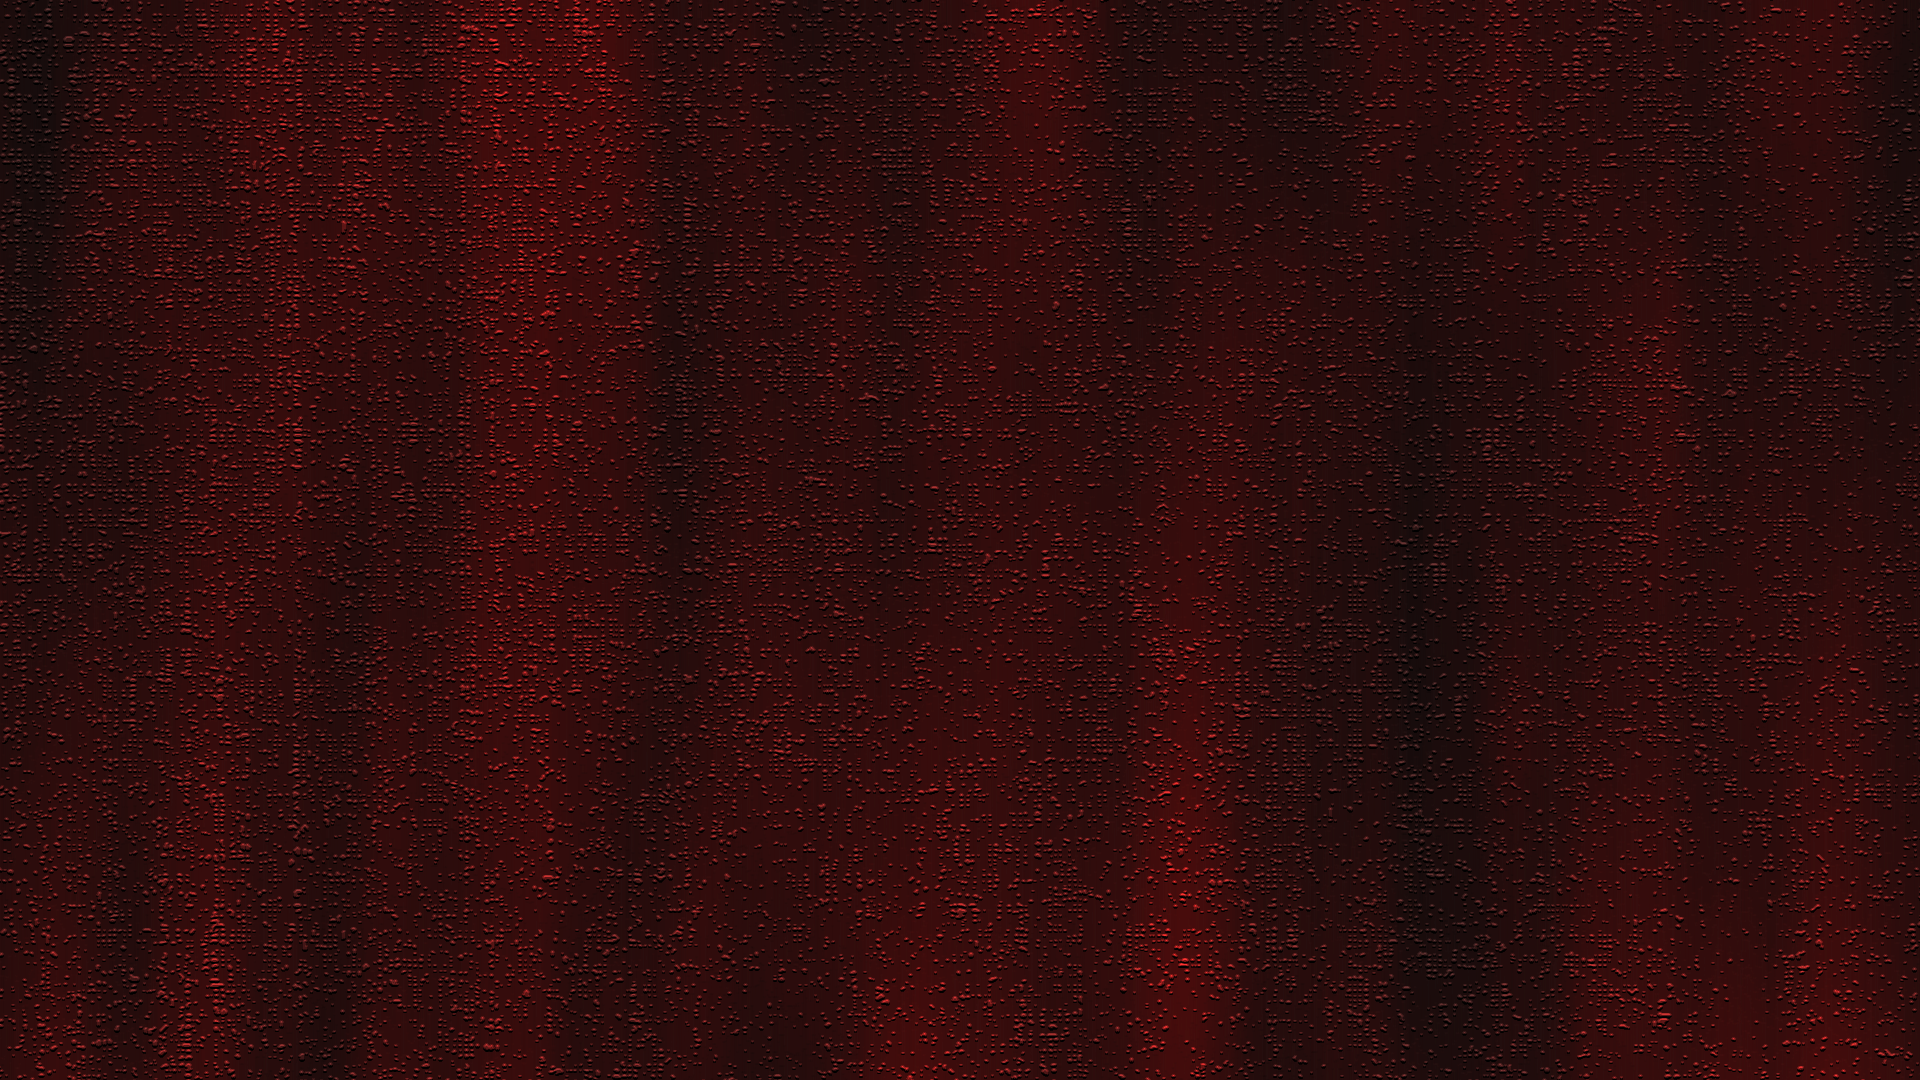 Rich Mahogany Curtains - Night , HD Wallpaper & Backgrounds